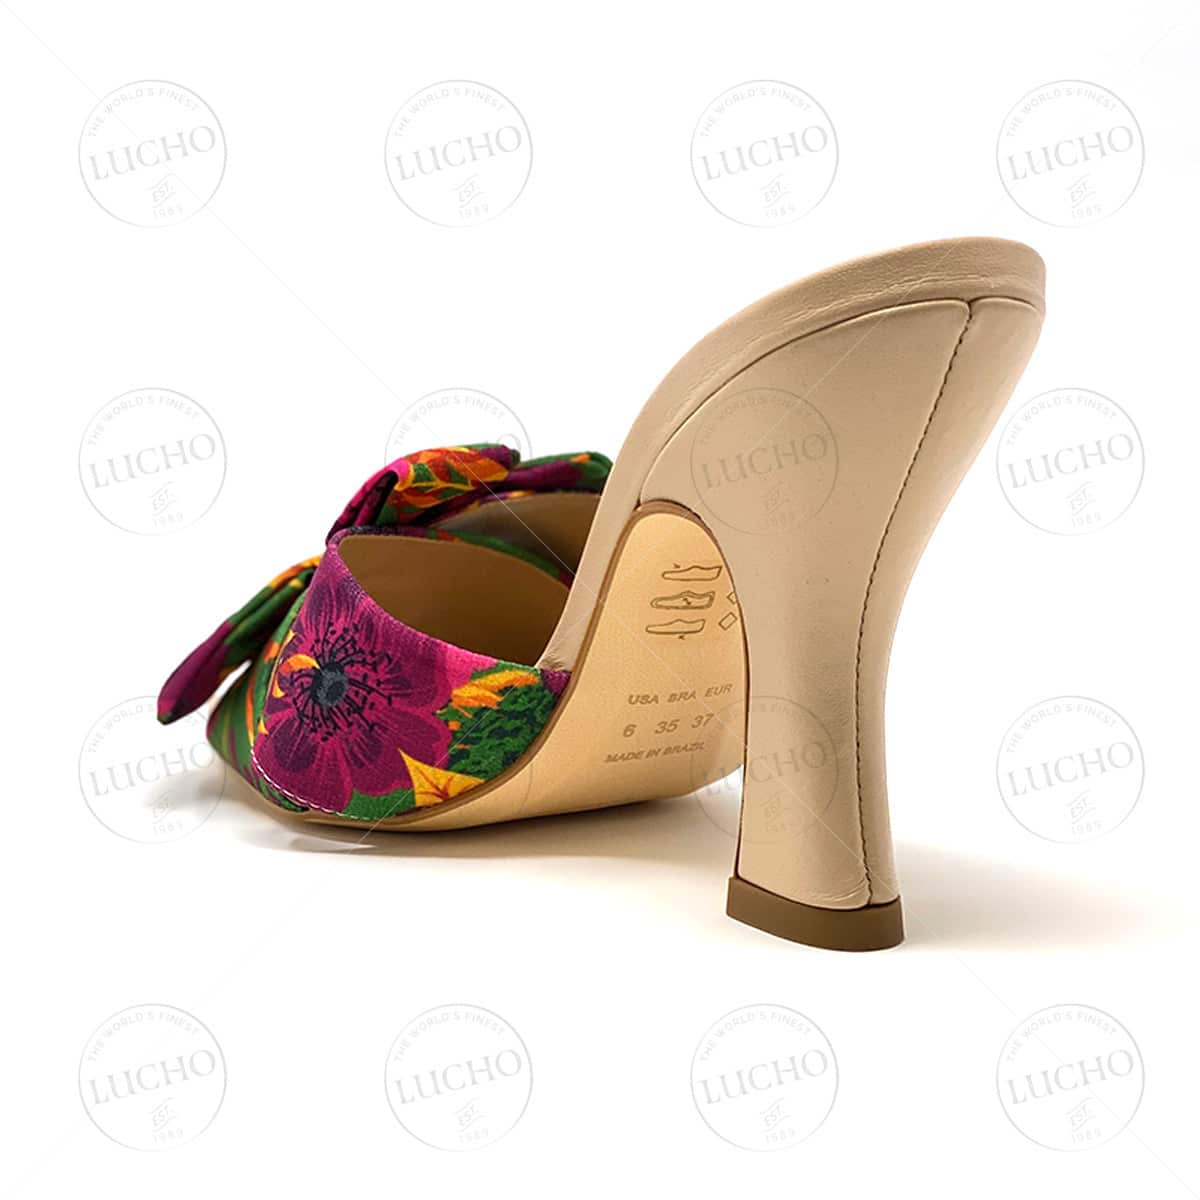 Floral Fabric Open Toe Clog Sandal LUCHO